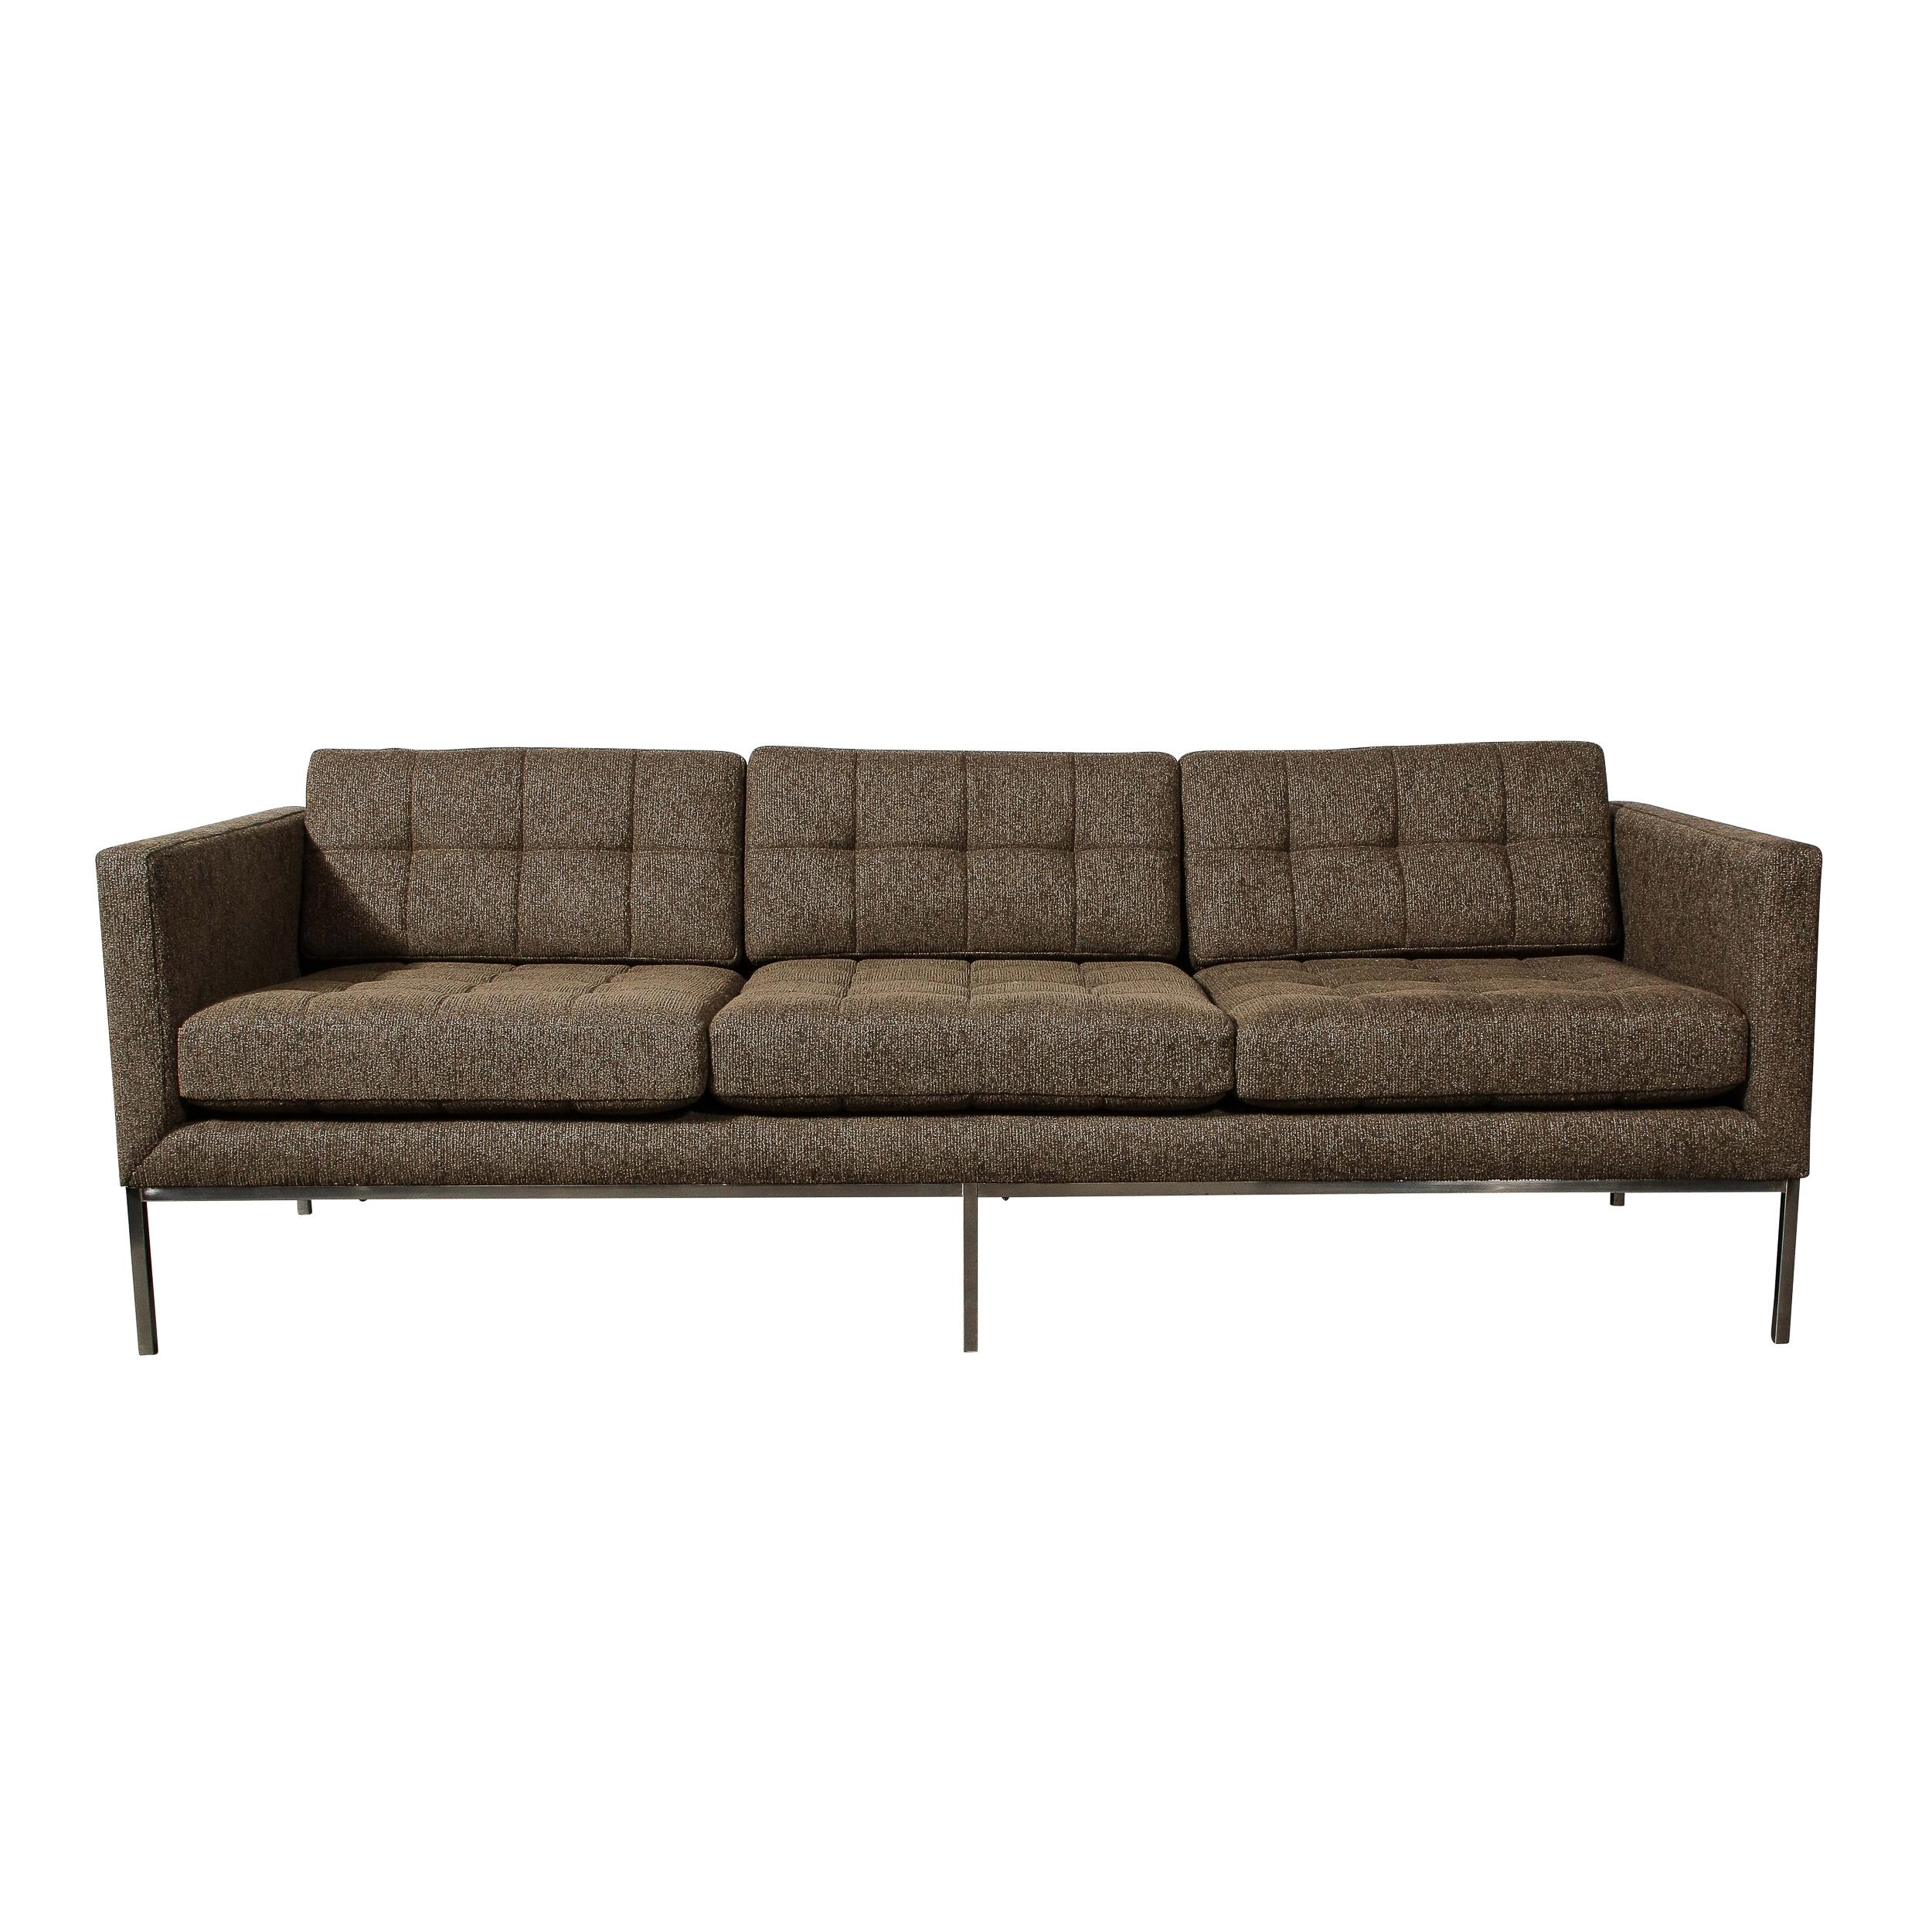 This thoughtfully designed Modernist Biscuit Tufted 'Relaxed' Sofa in Holly Hunt Upholstery is by Florence Knoll, originating from the United States, Circa 2000. Featuring a chrome frame and supports in minimal rectilinear pillars, the body of the